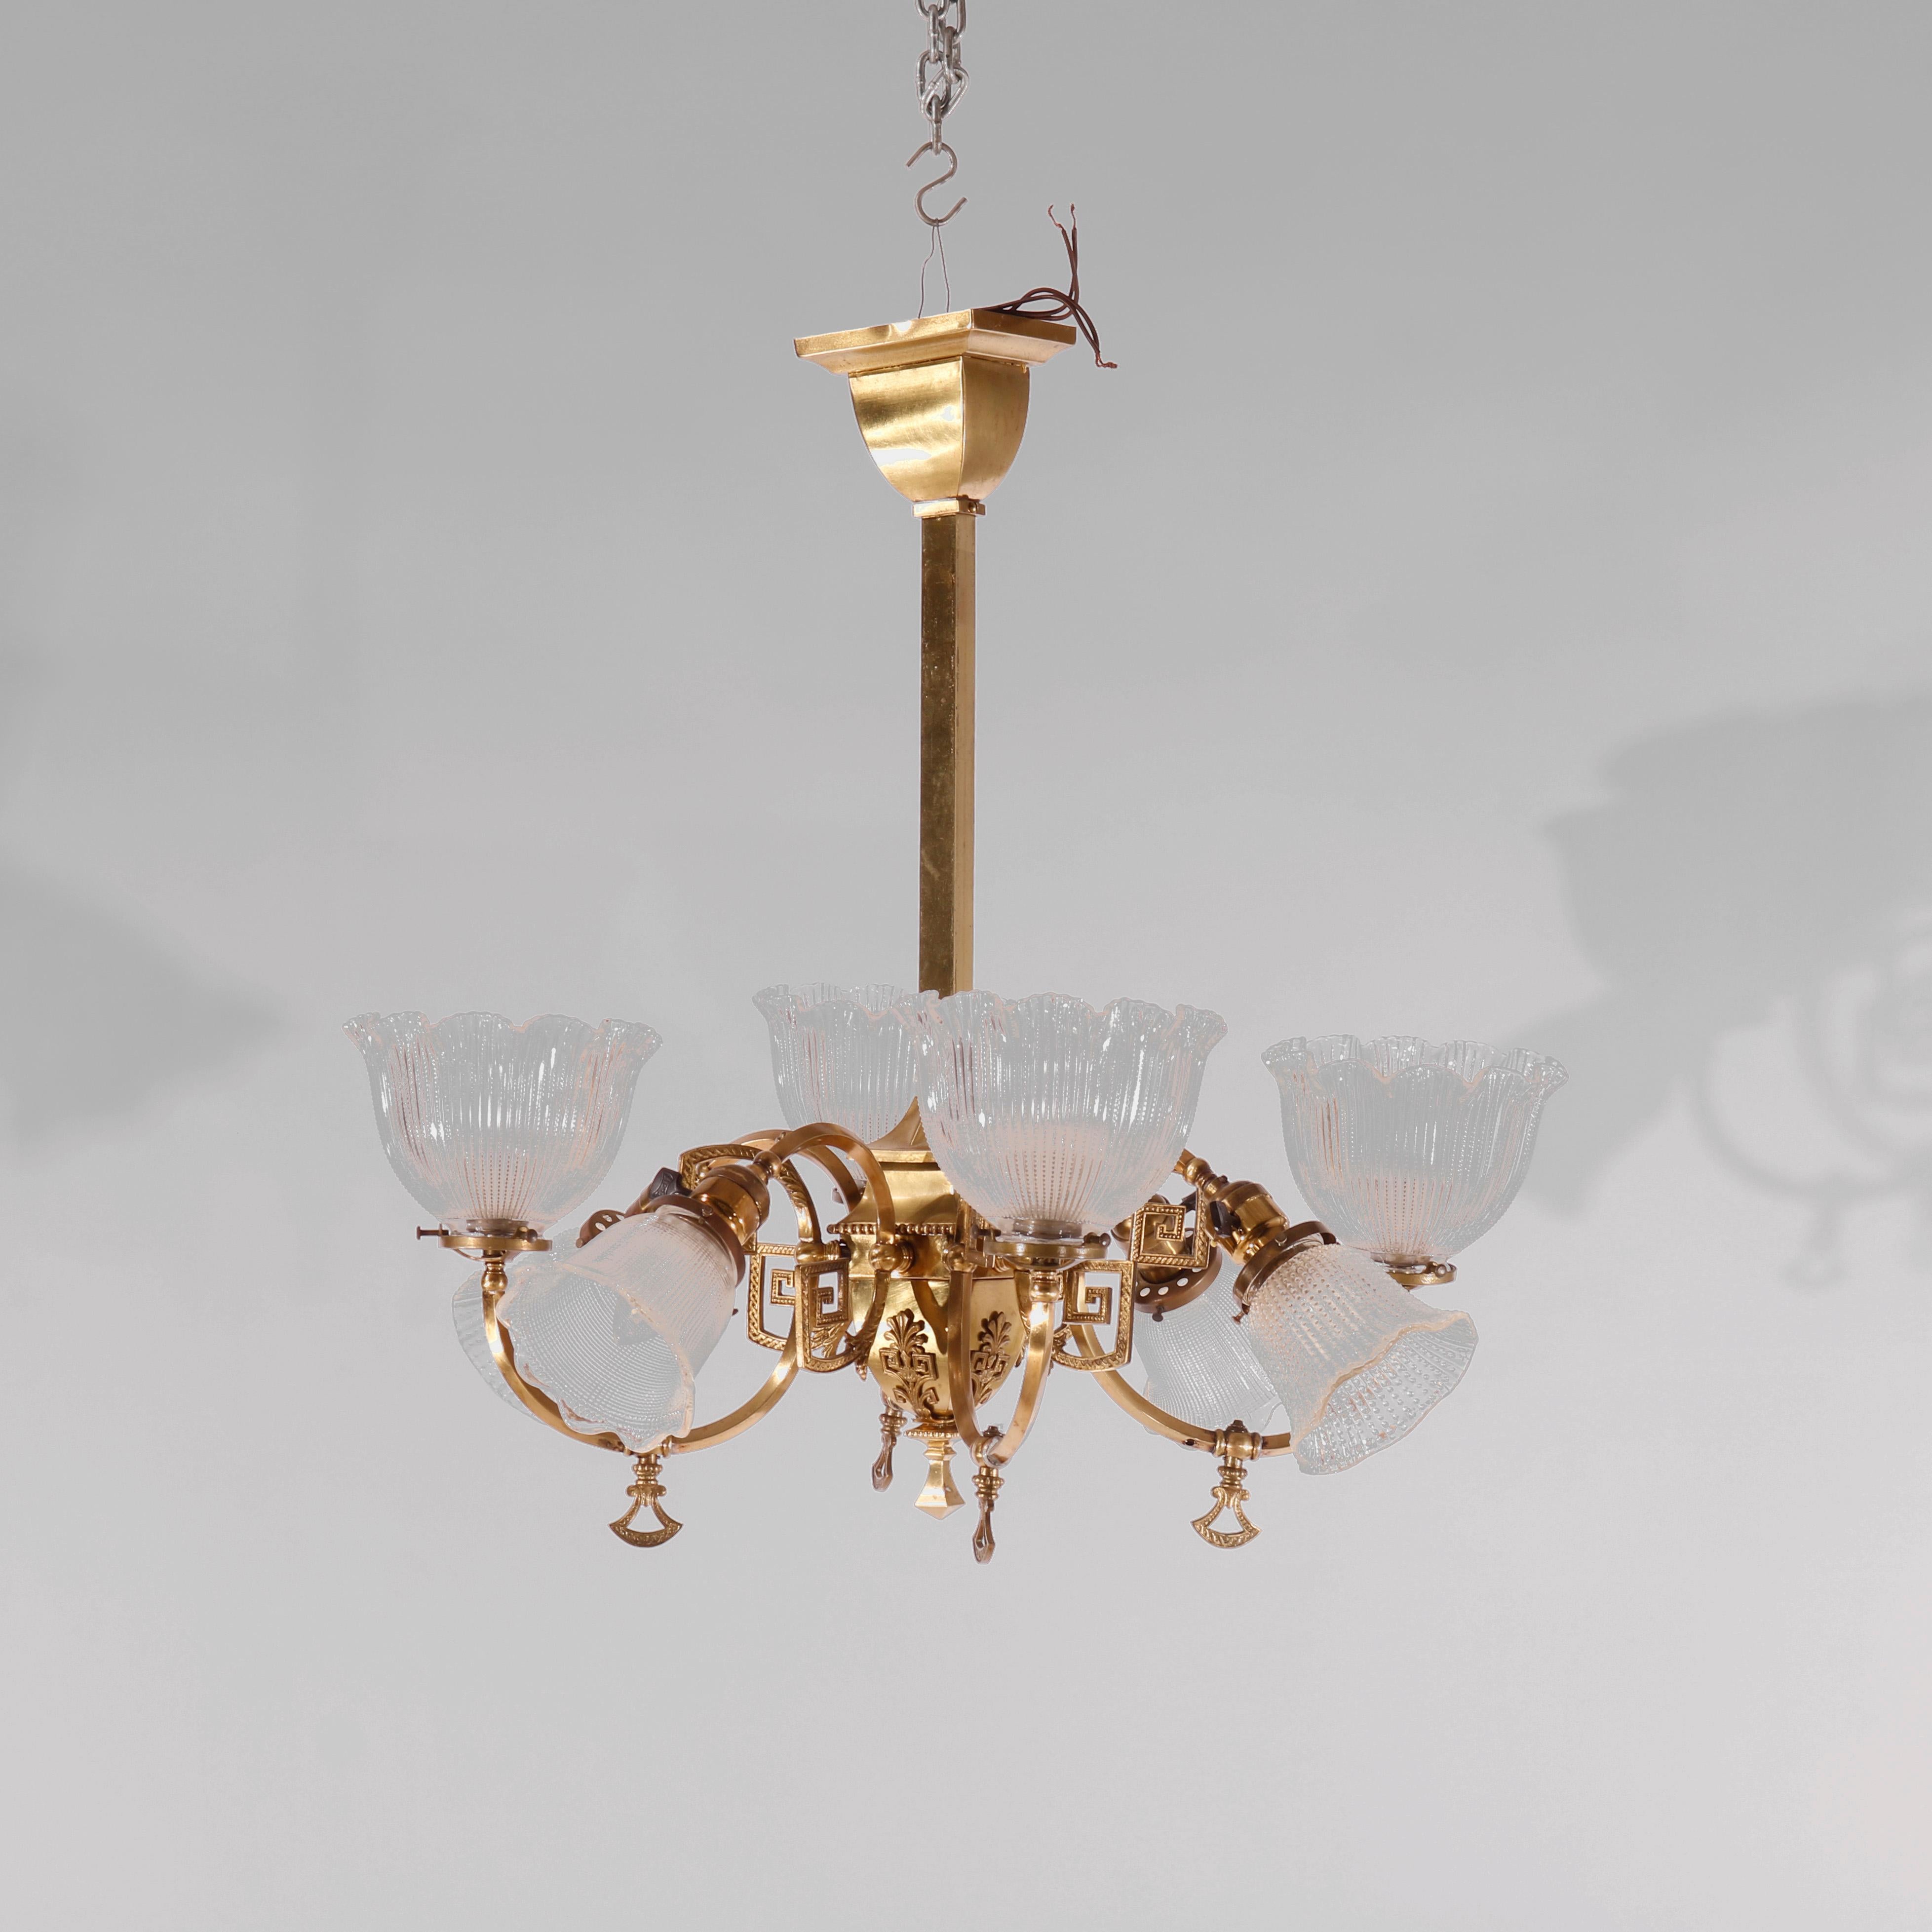 An antique up-and-down hanging fixture offers gilt brass frame with Classical elements including Greek Key design, four up-lights and four down-lights, c1930

Measures - 26